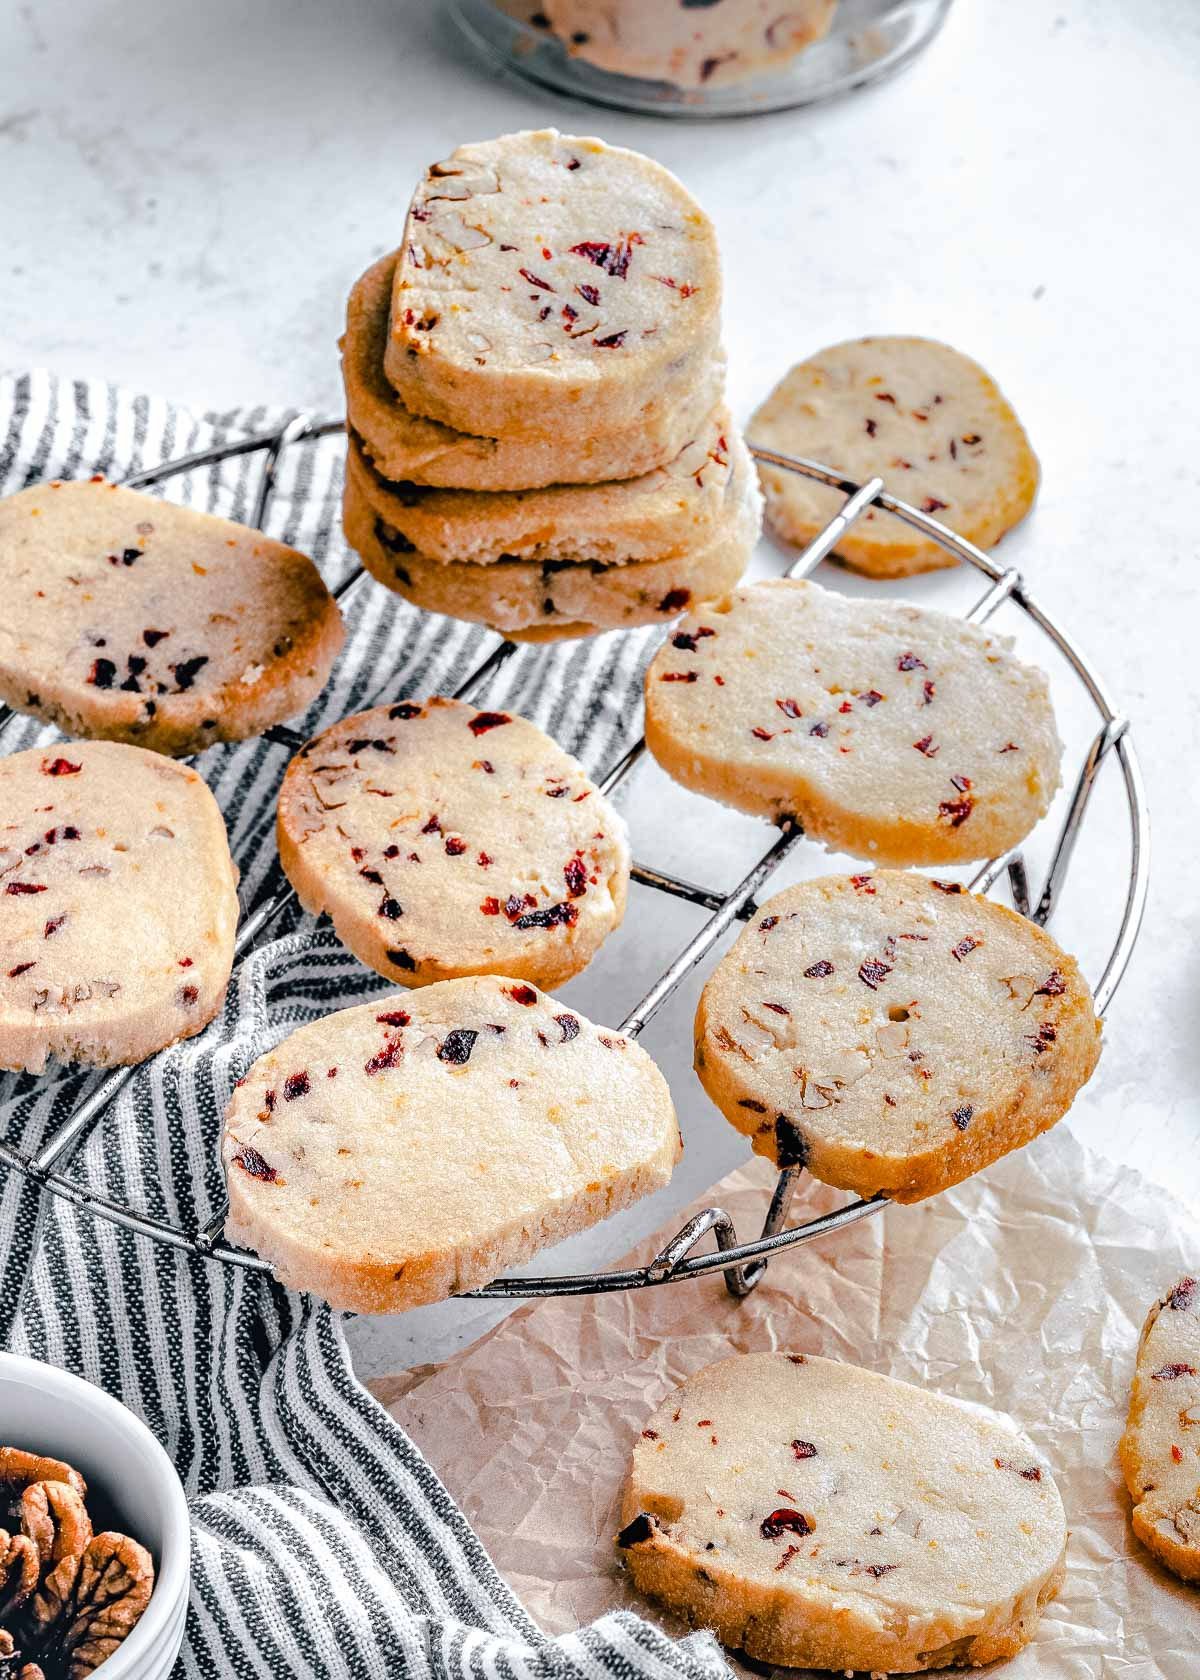 stacks of shortbread cookies are scattered on a round wire rack with a black and white striped towel underneath.